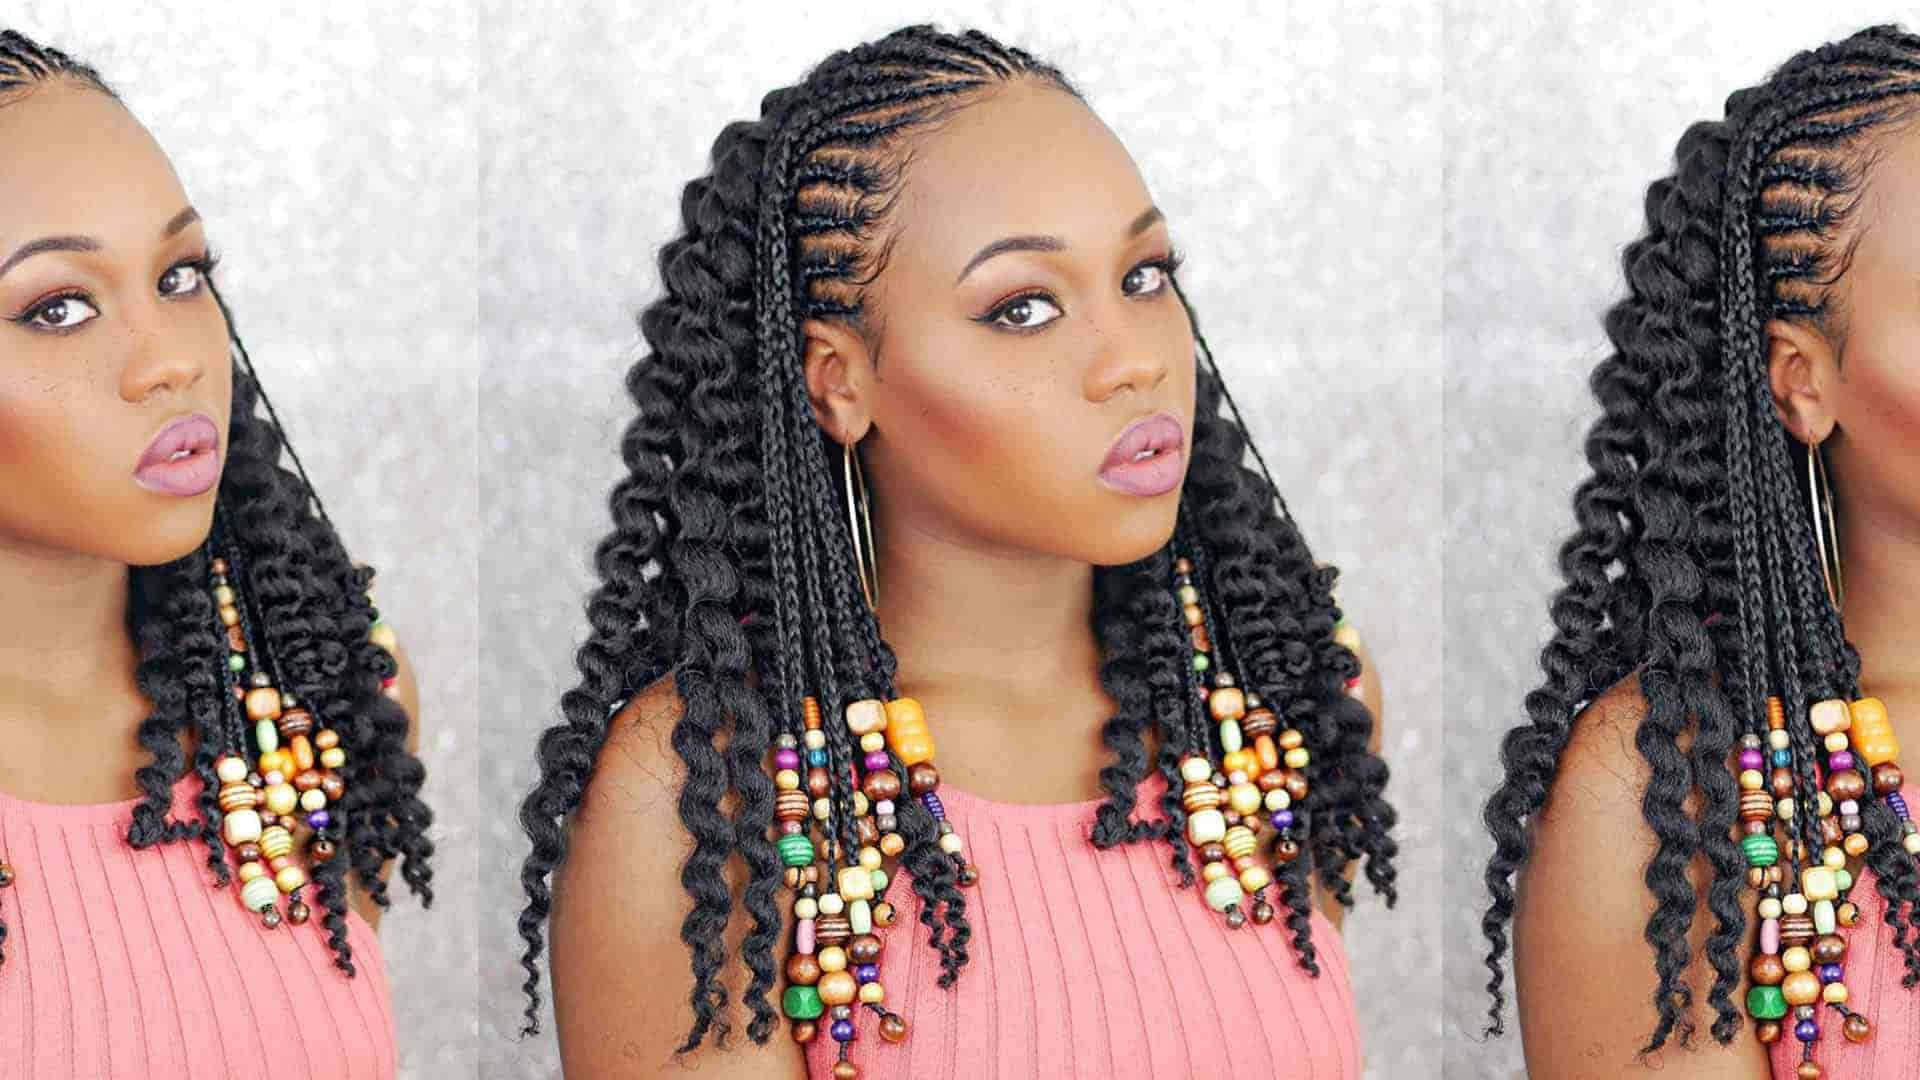 A Woman With Braids And Beads On Her Hair